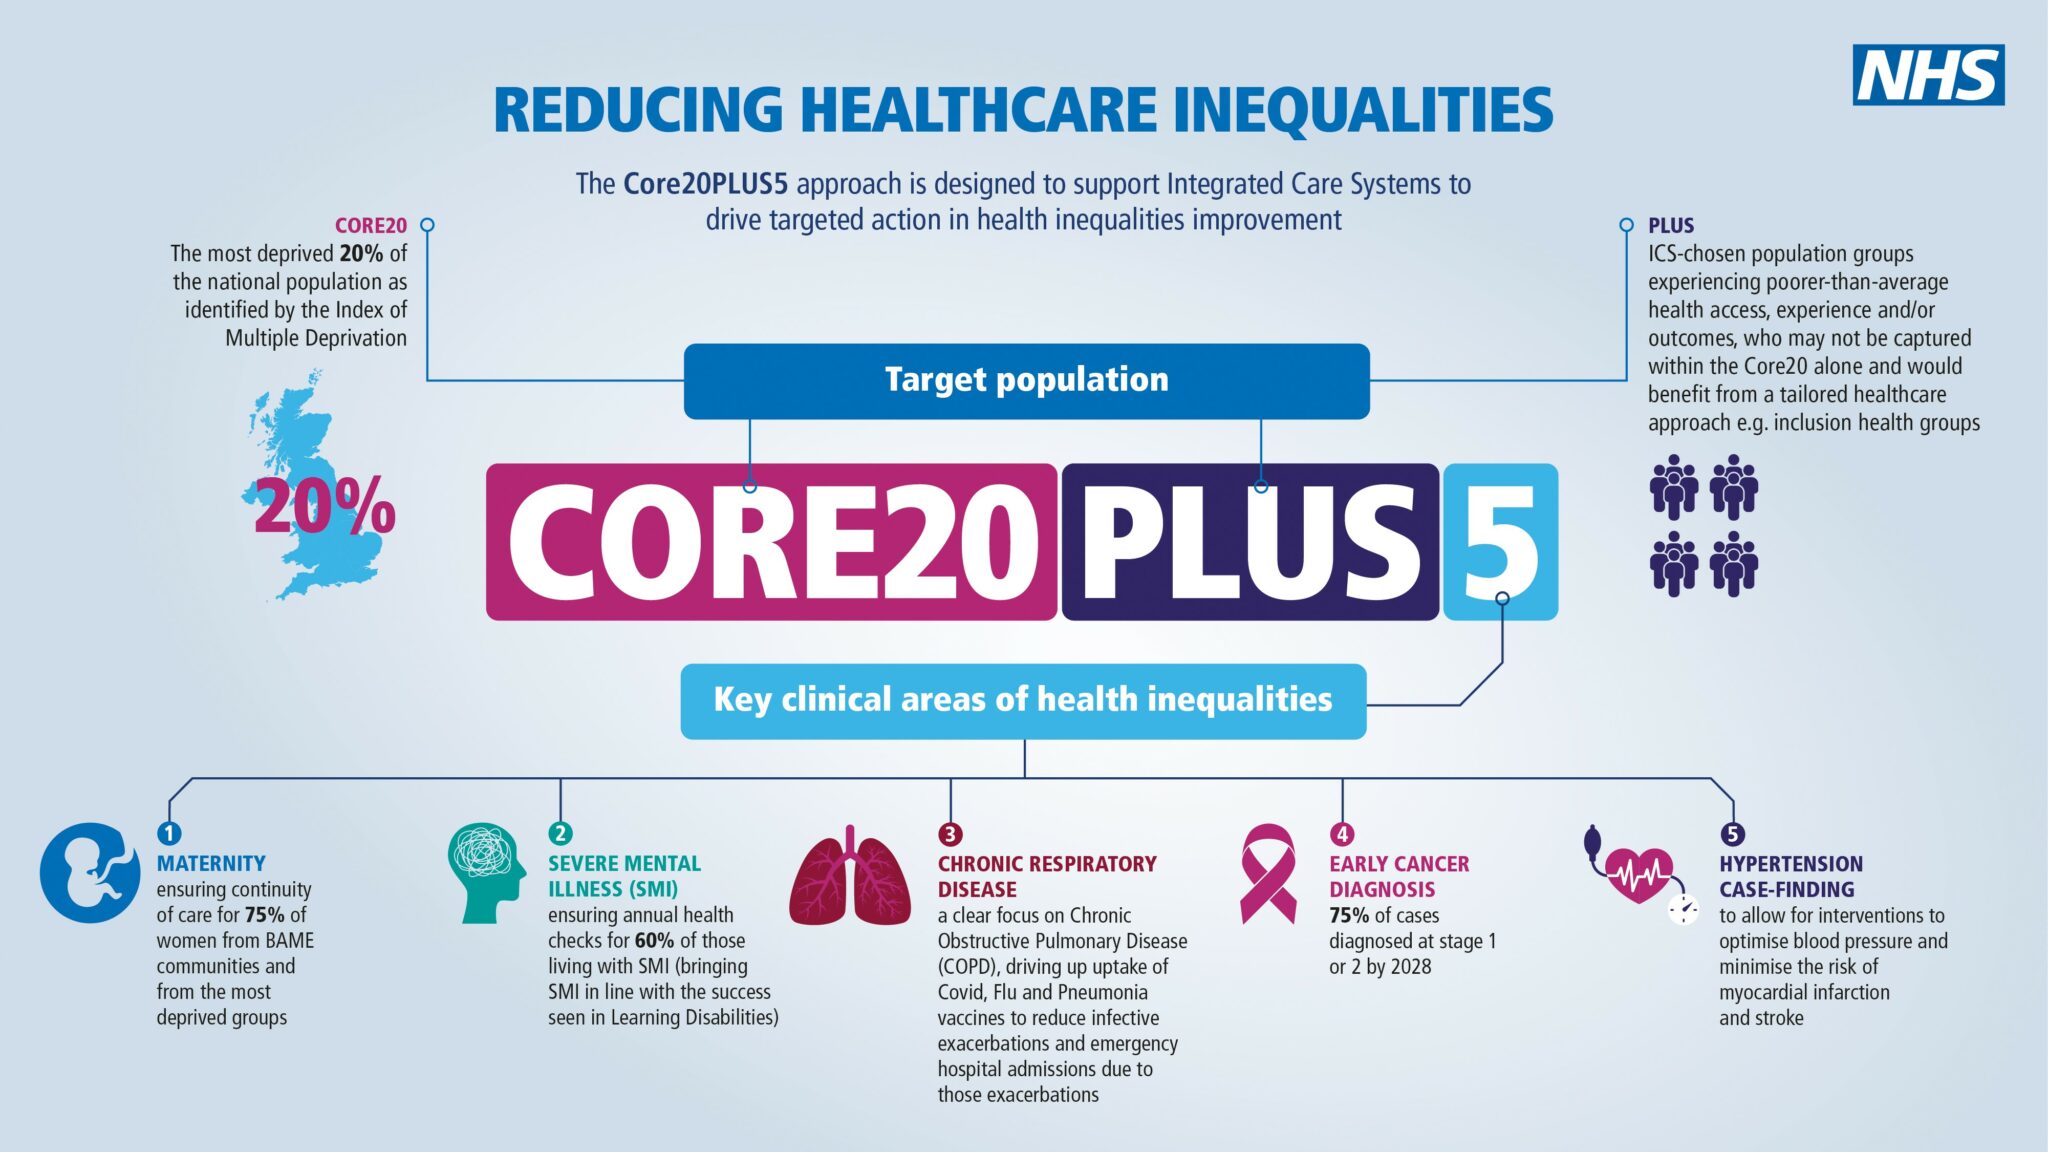 The NHS Core20PLUS5 initiative is designed to support Integrated Care Systems to drive targeted action in healthcare inequalities improvement